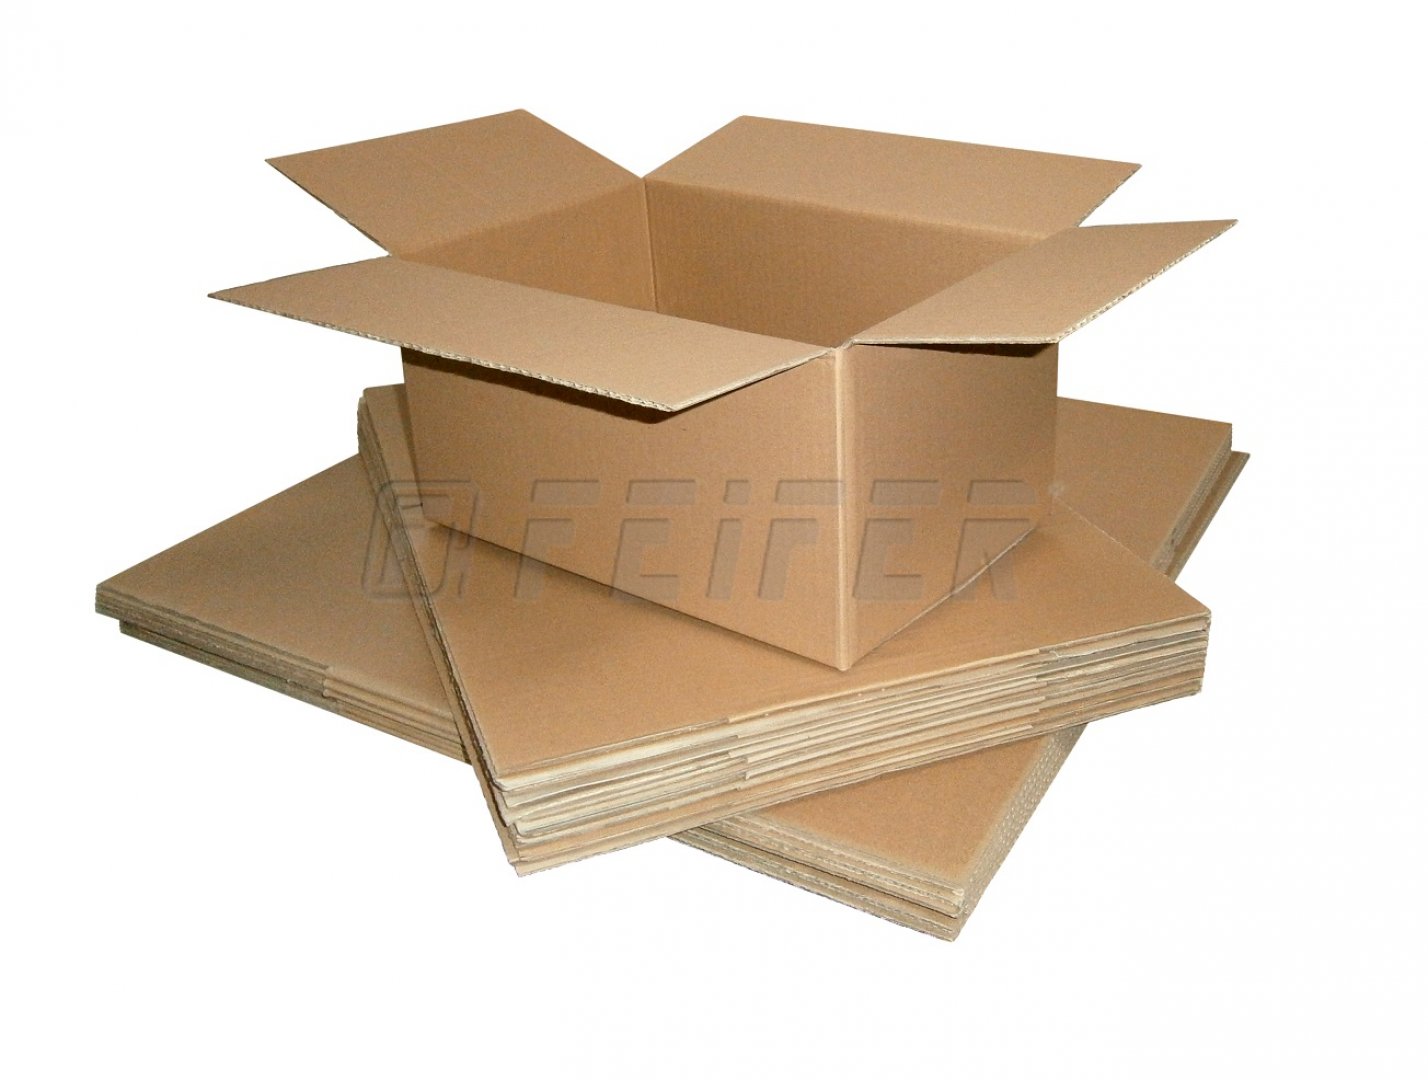 Folding cartons 150 x 150 x 150 mm Packaging Cartons Cardboard Boxes Postal Package 